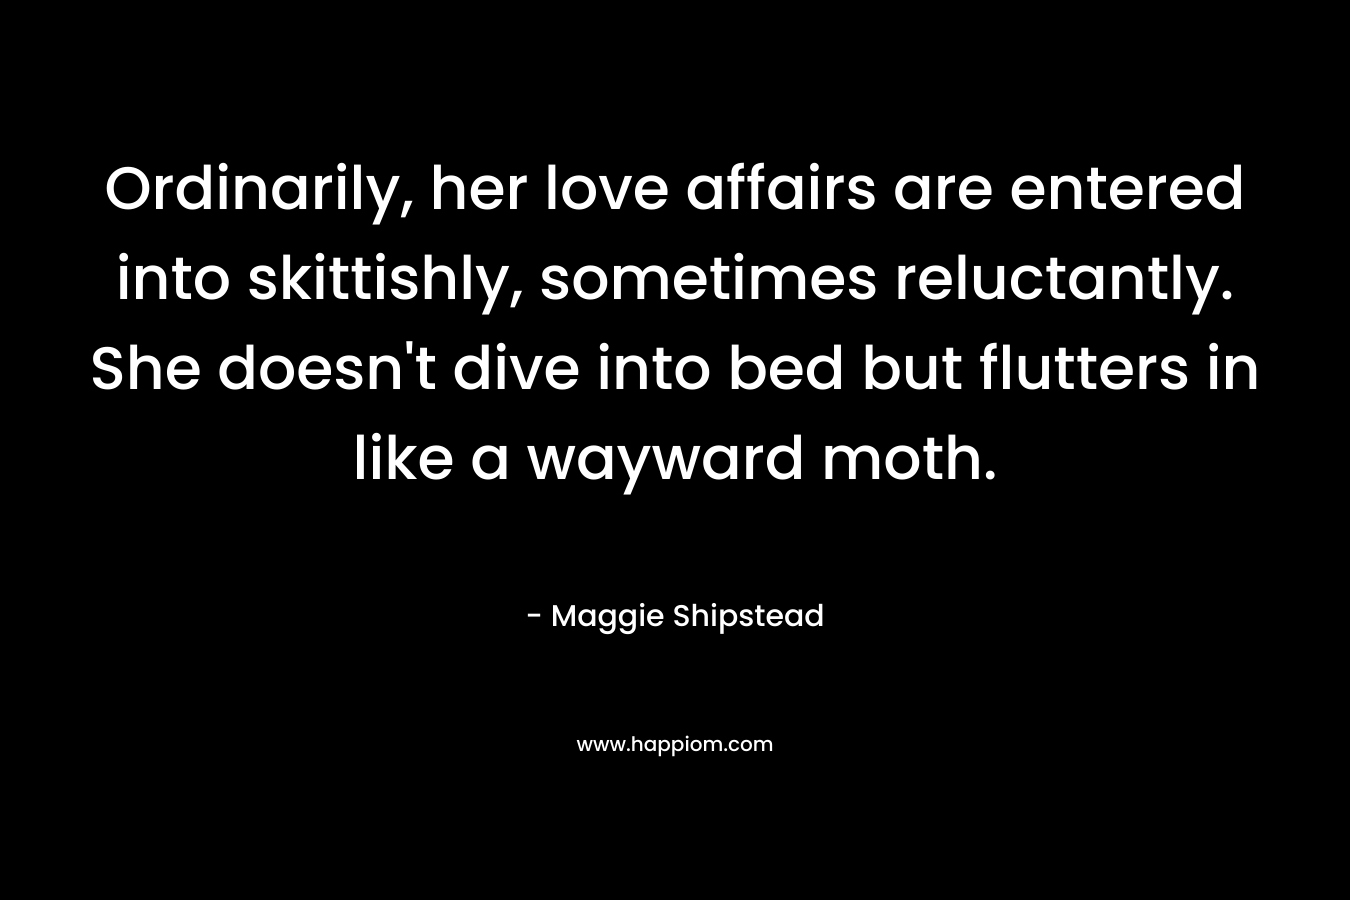 Ordinarily, her love affairs are entered into skittishly, sometimes reluctantly. She doesn't dive into bed but flutters in like a wayward moth.